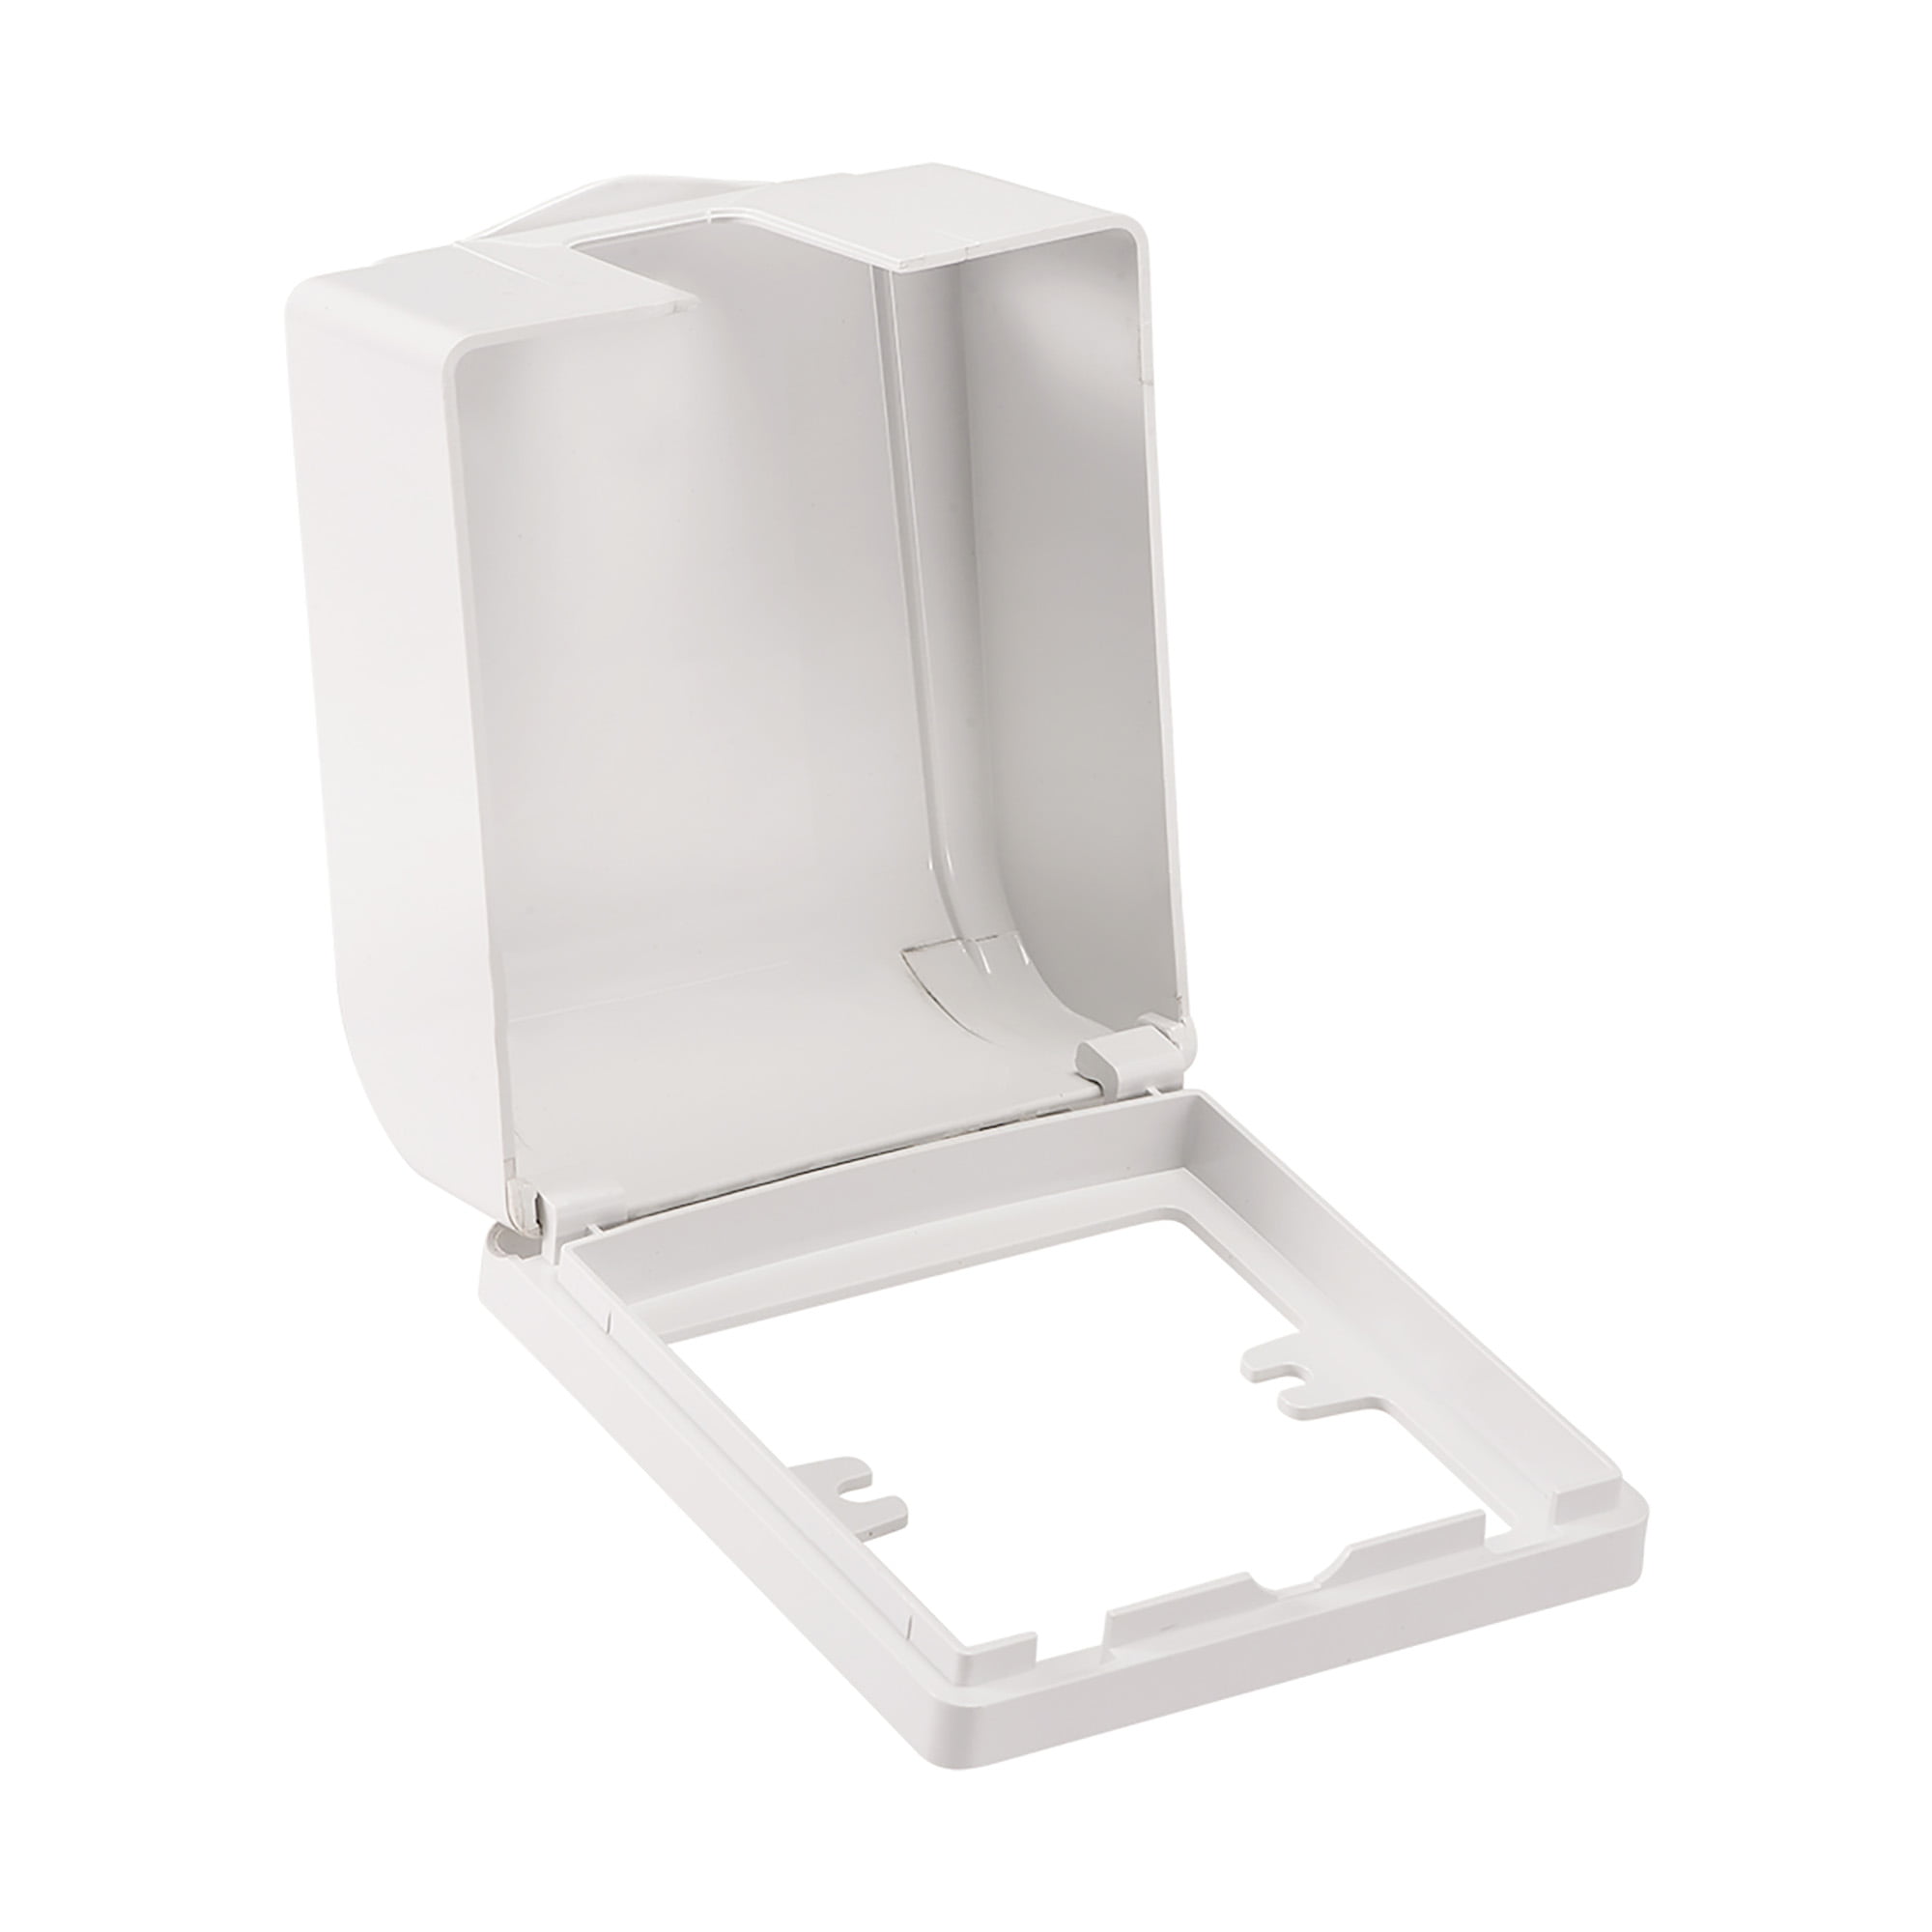 Weatherproof outlet cover Plug In use Receptacle Interior Protector Usa 98x110x55mm White 2Pcs 